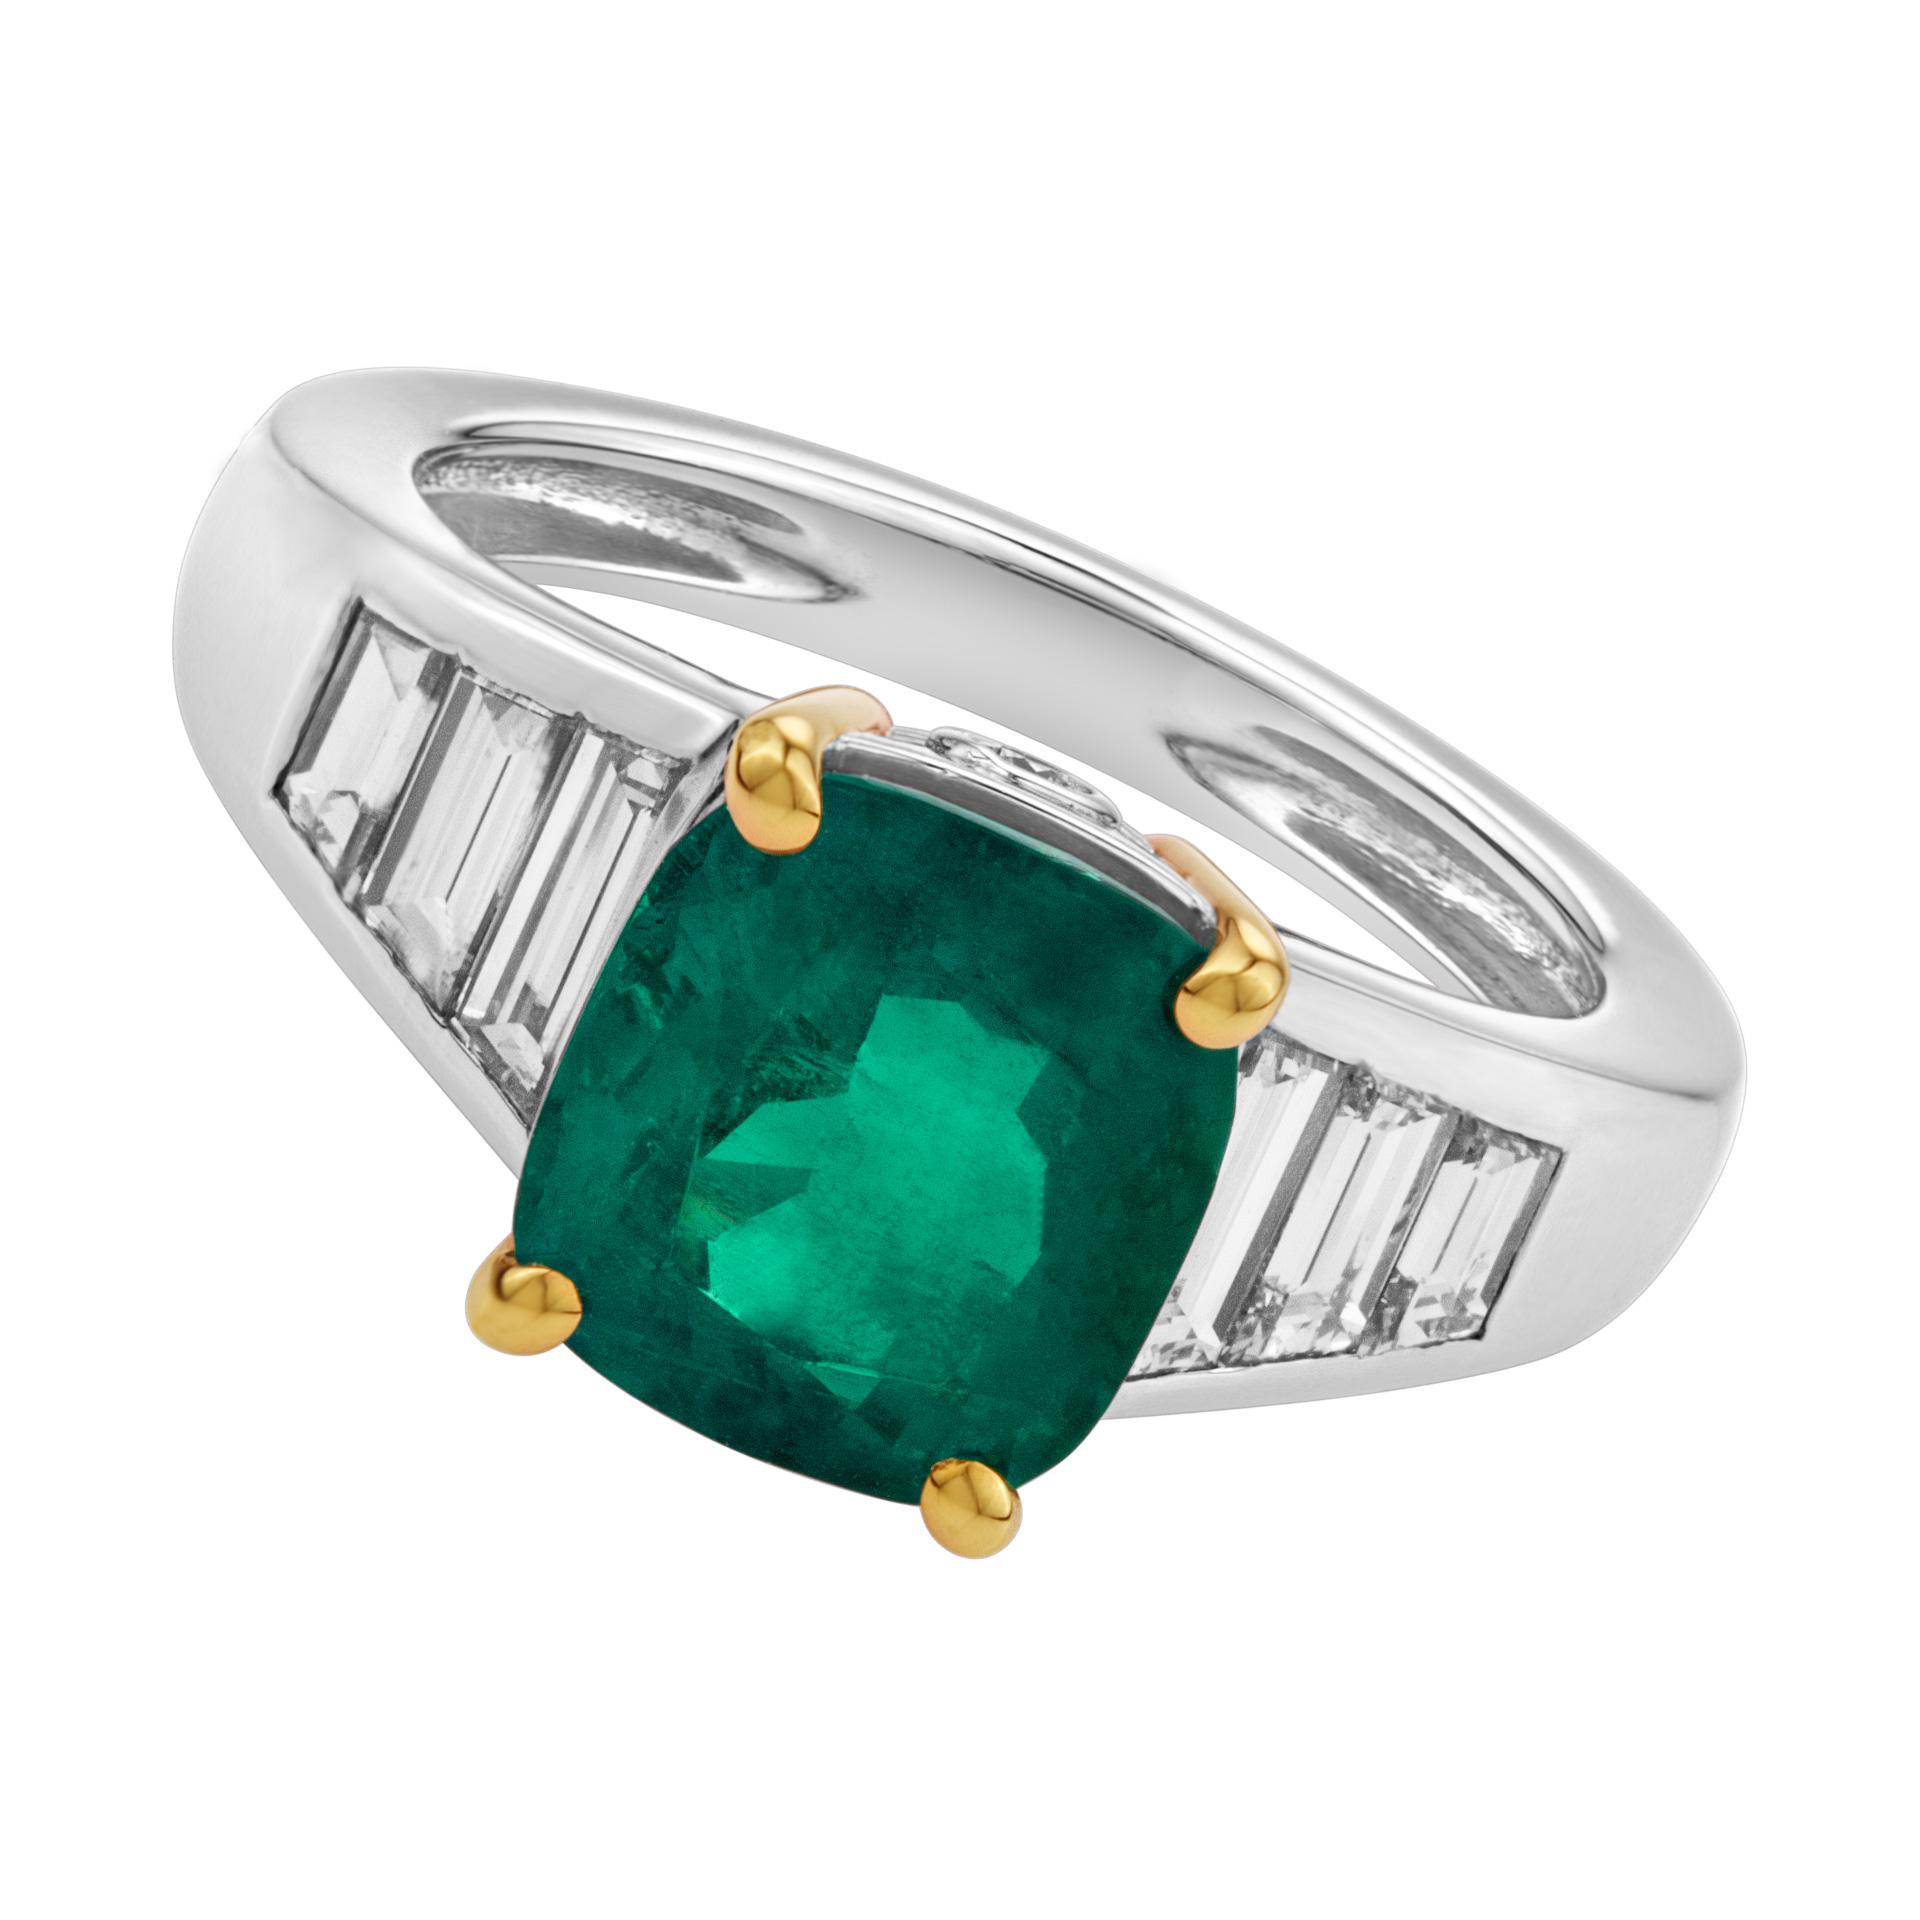 Certified Colombian emerald and diamond ring set in Platinum and 18k yellow gold